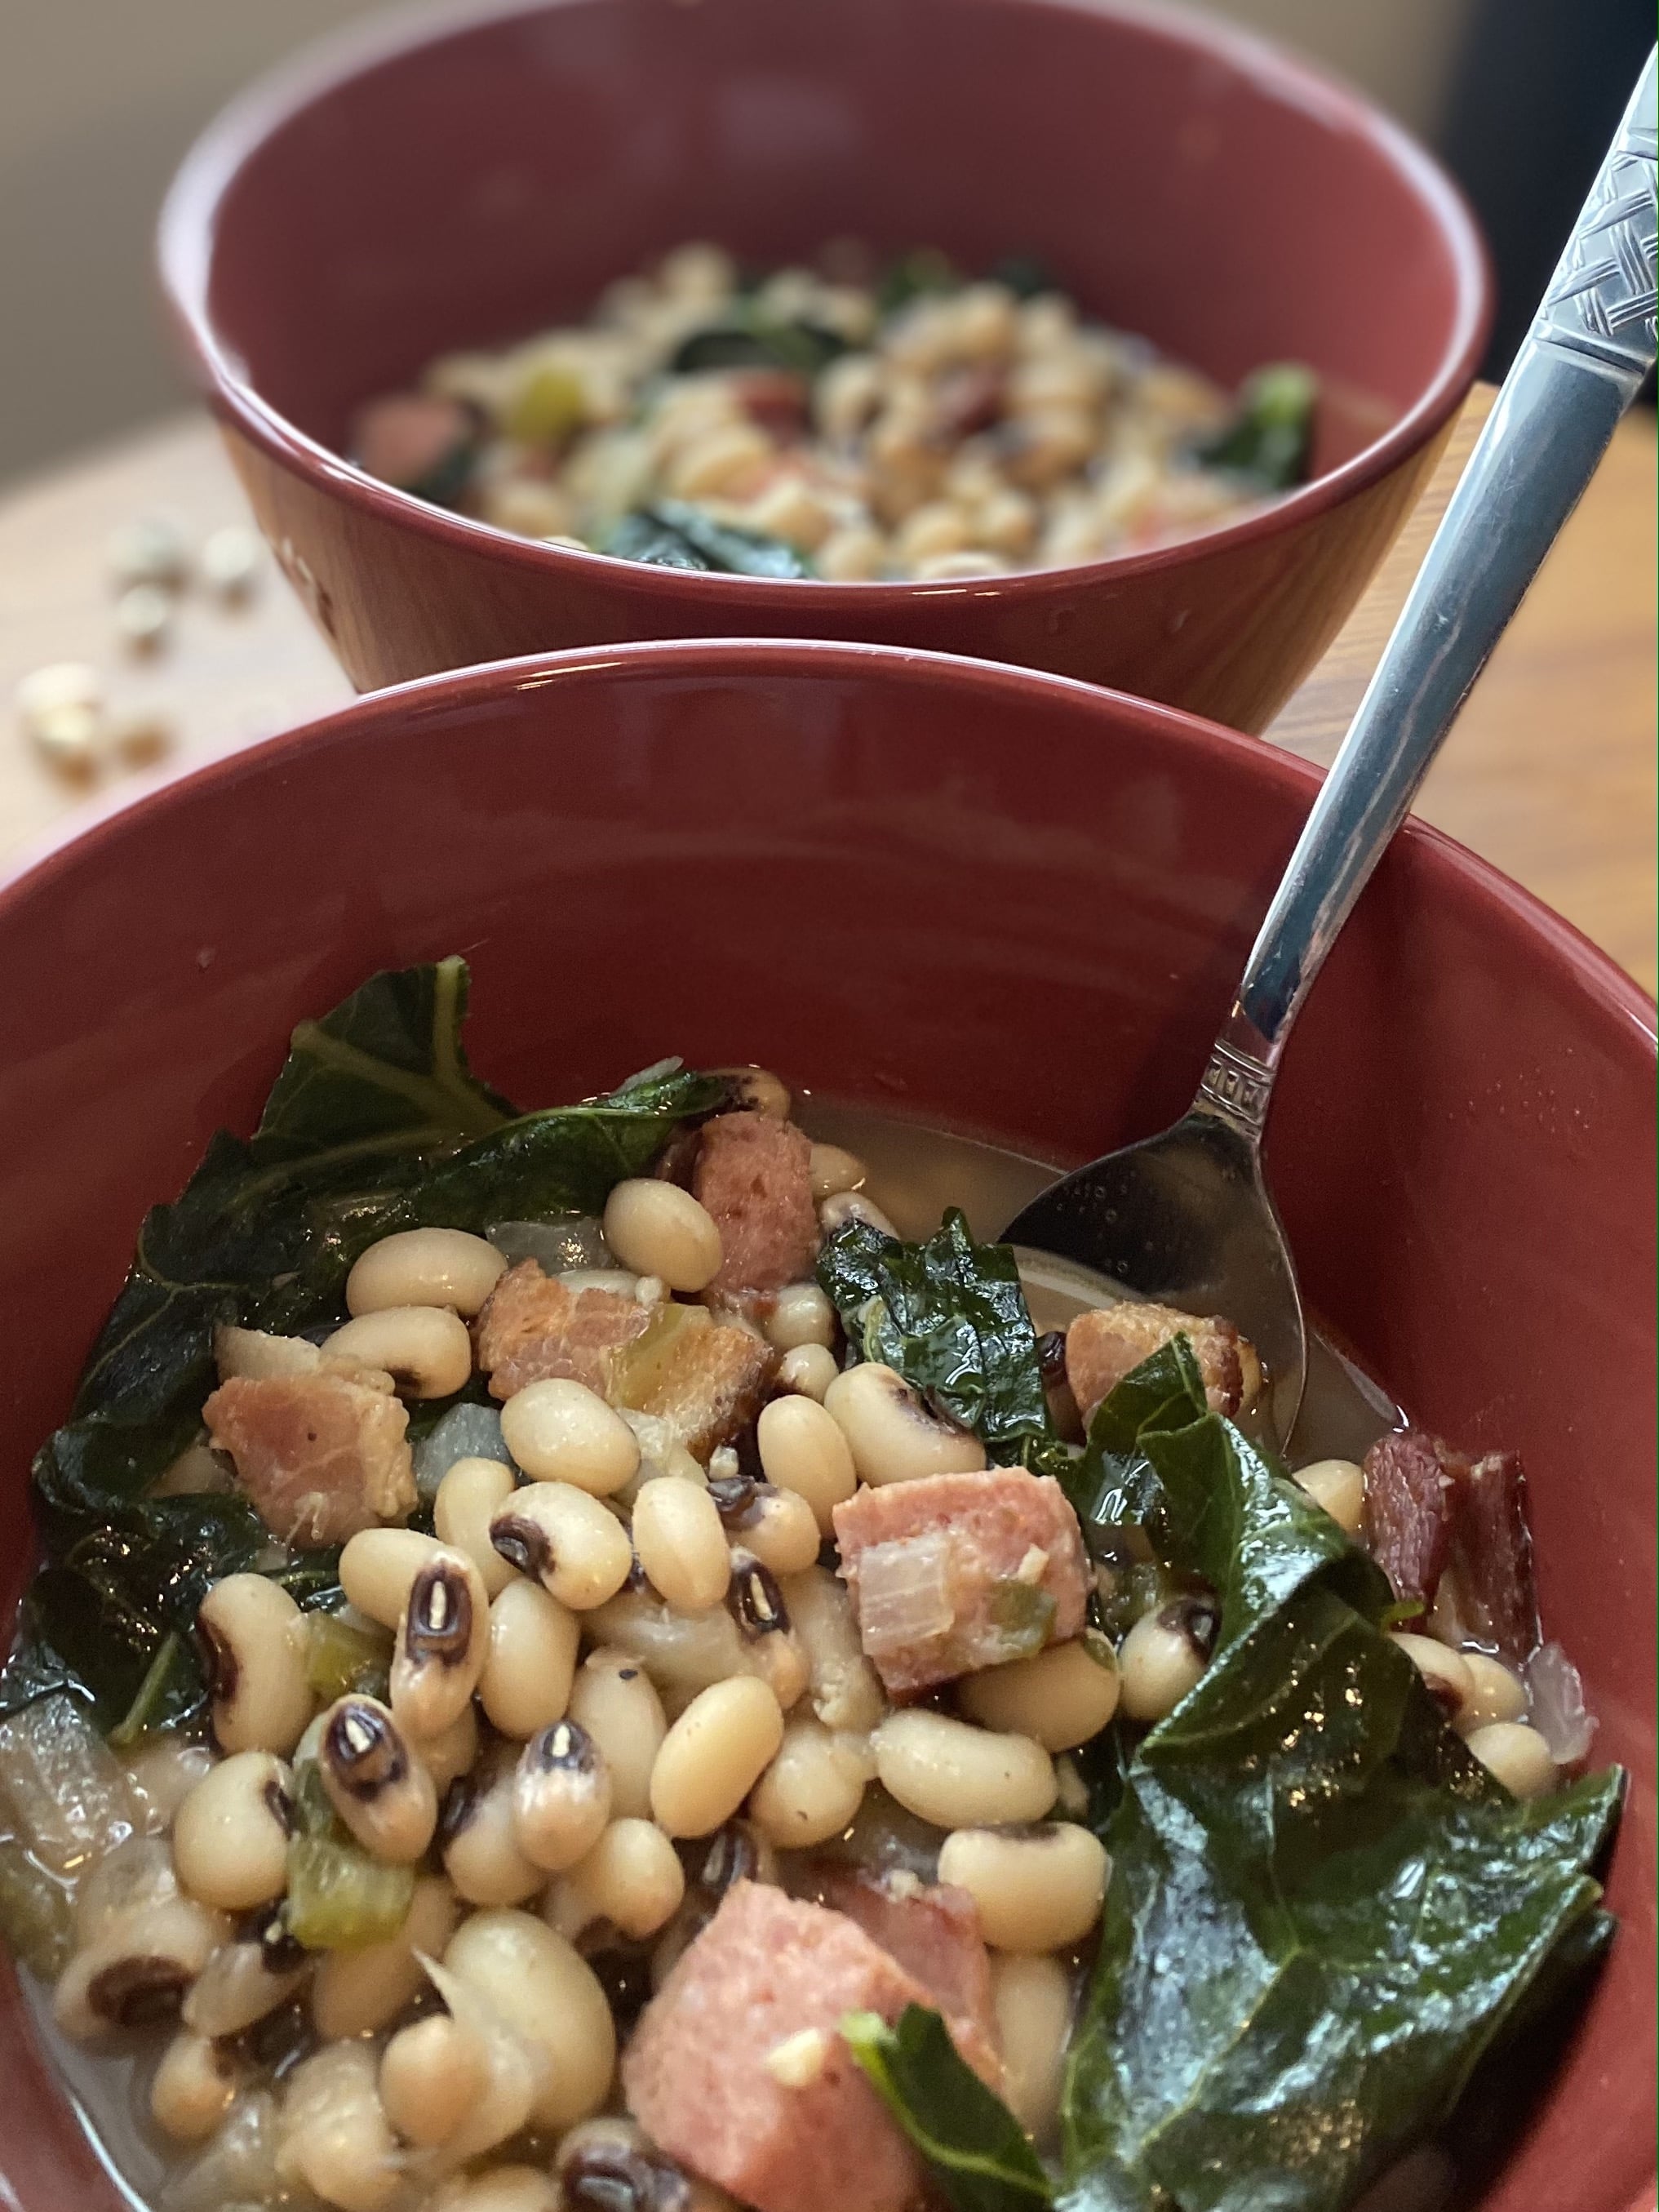 Southern-Style Black-Eyed Peas Recipe and Photos | POPSUGAR Food